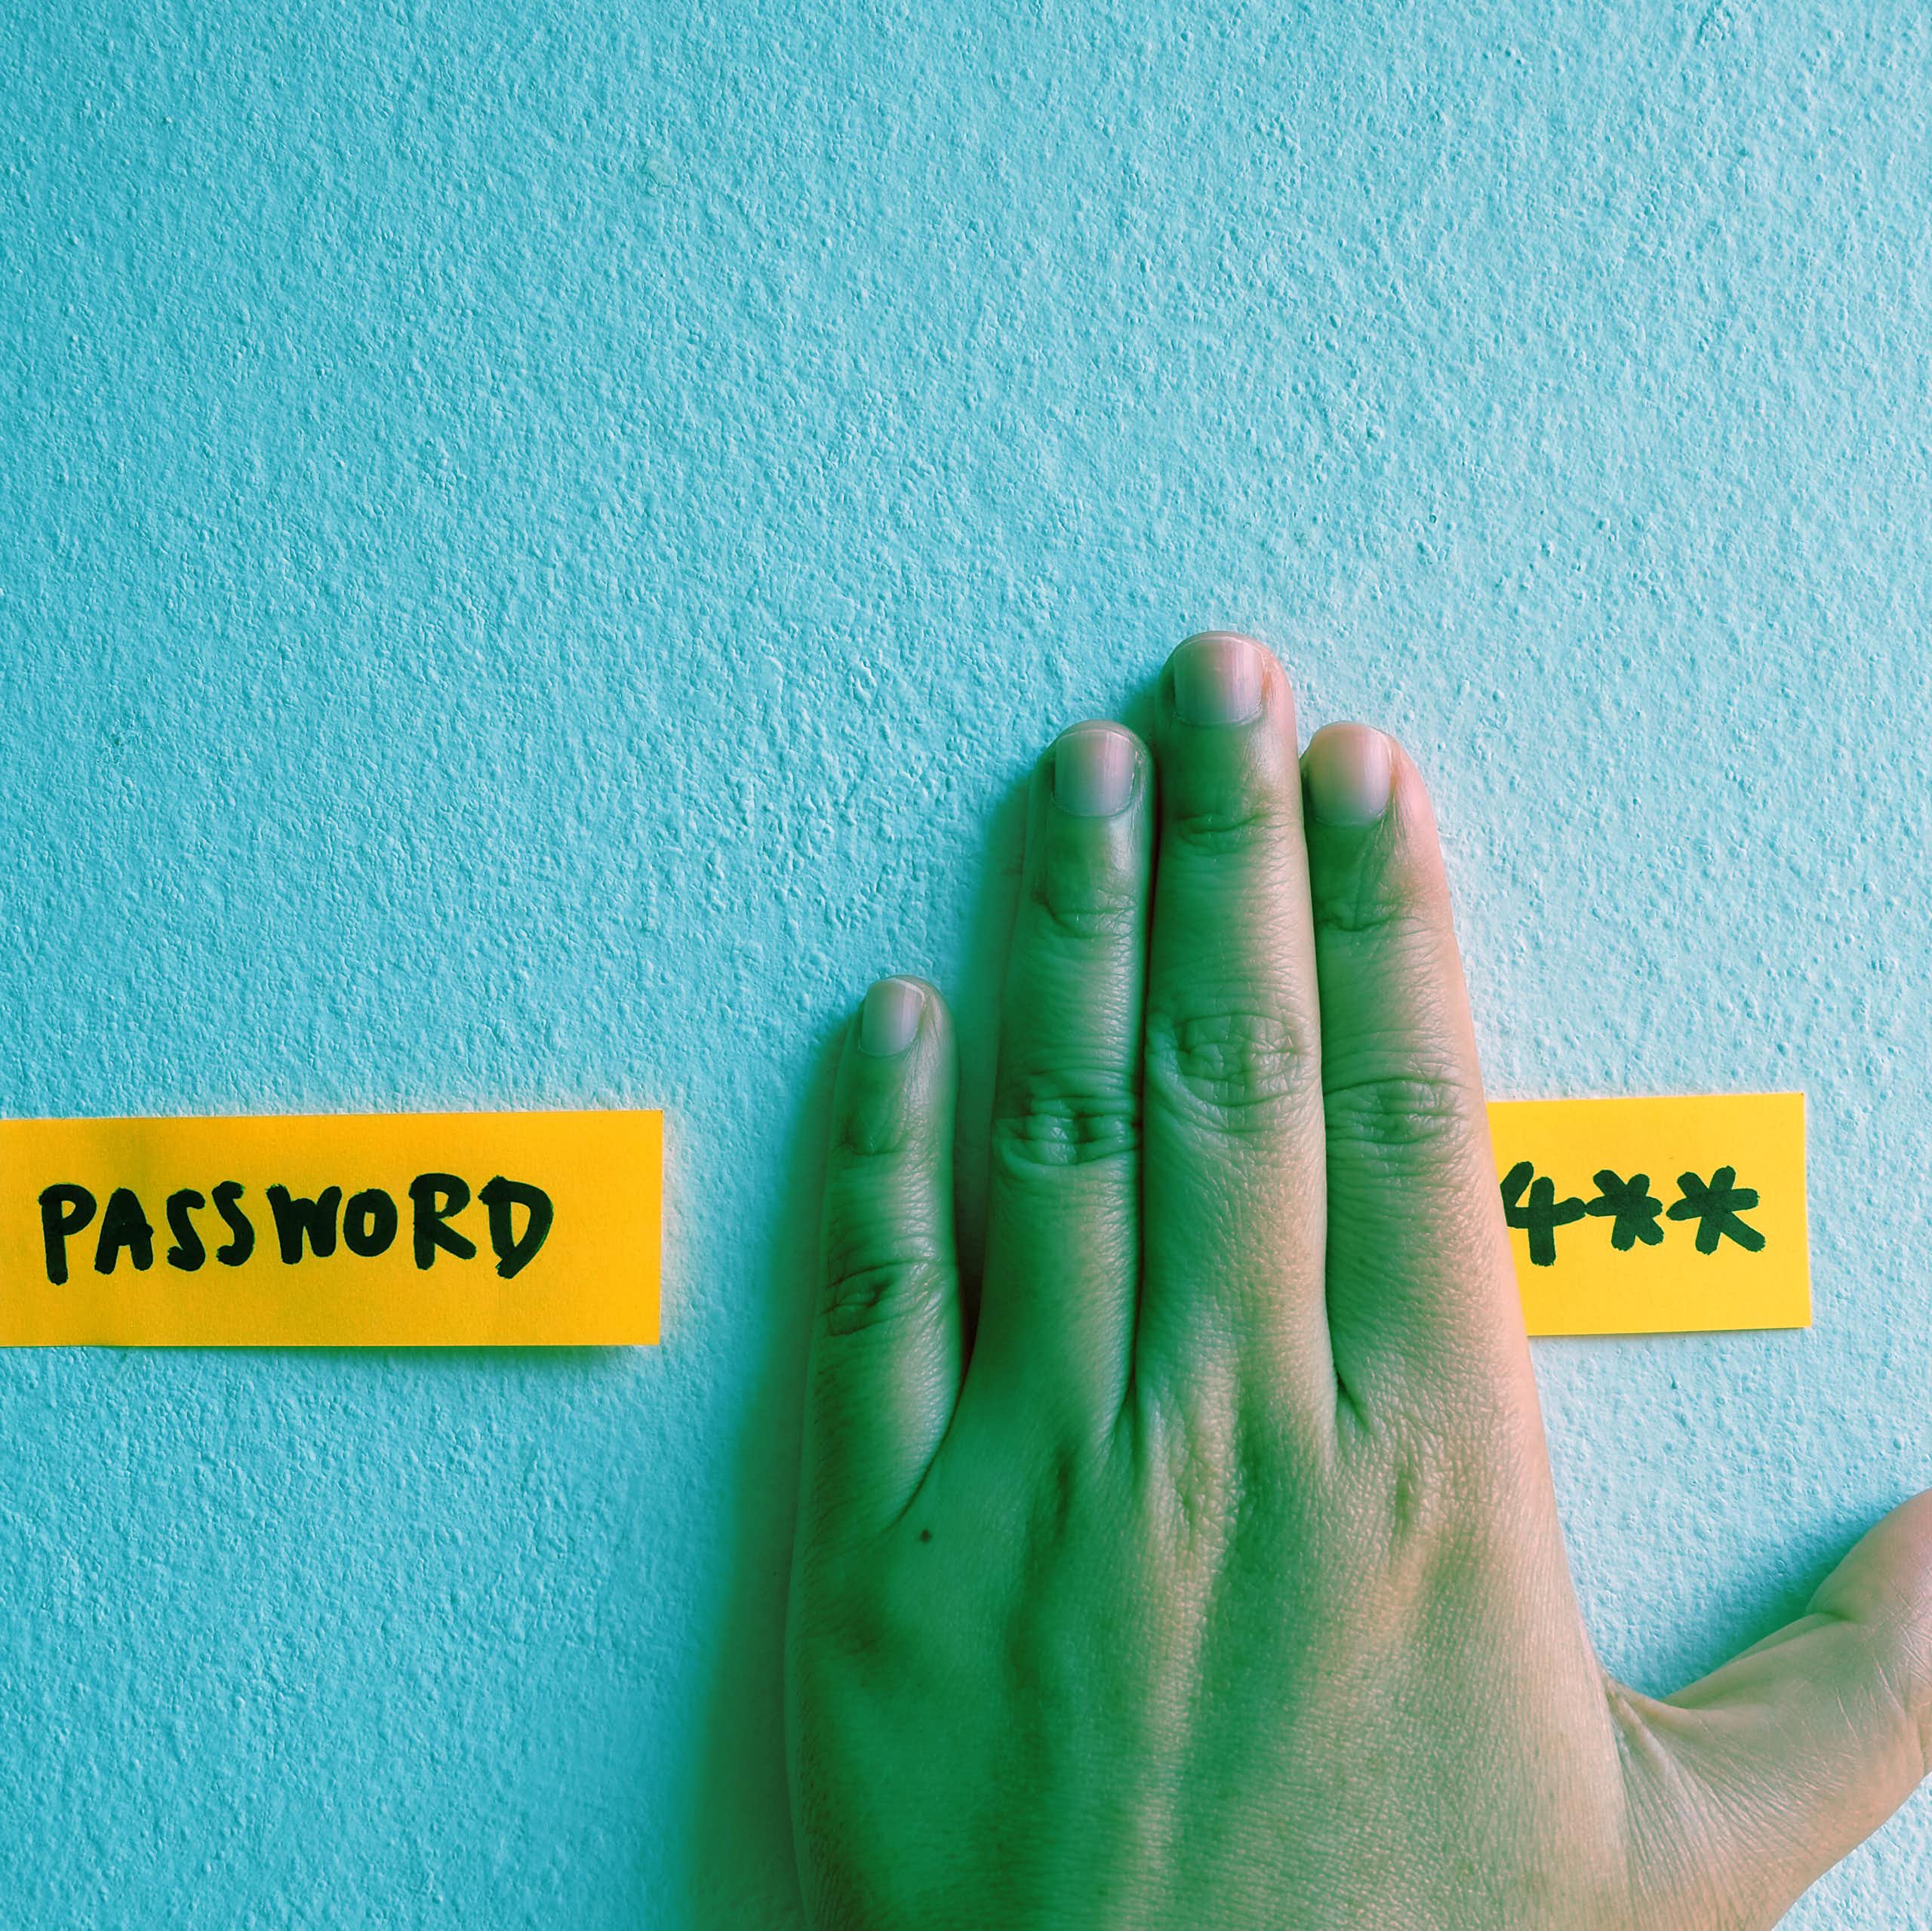 A hand partially covering a sticky note with a password on it.